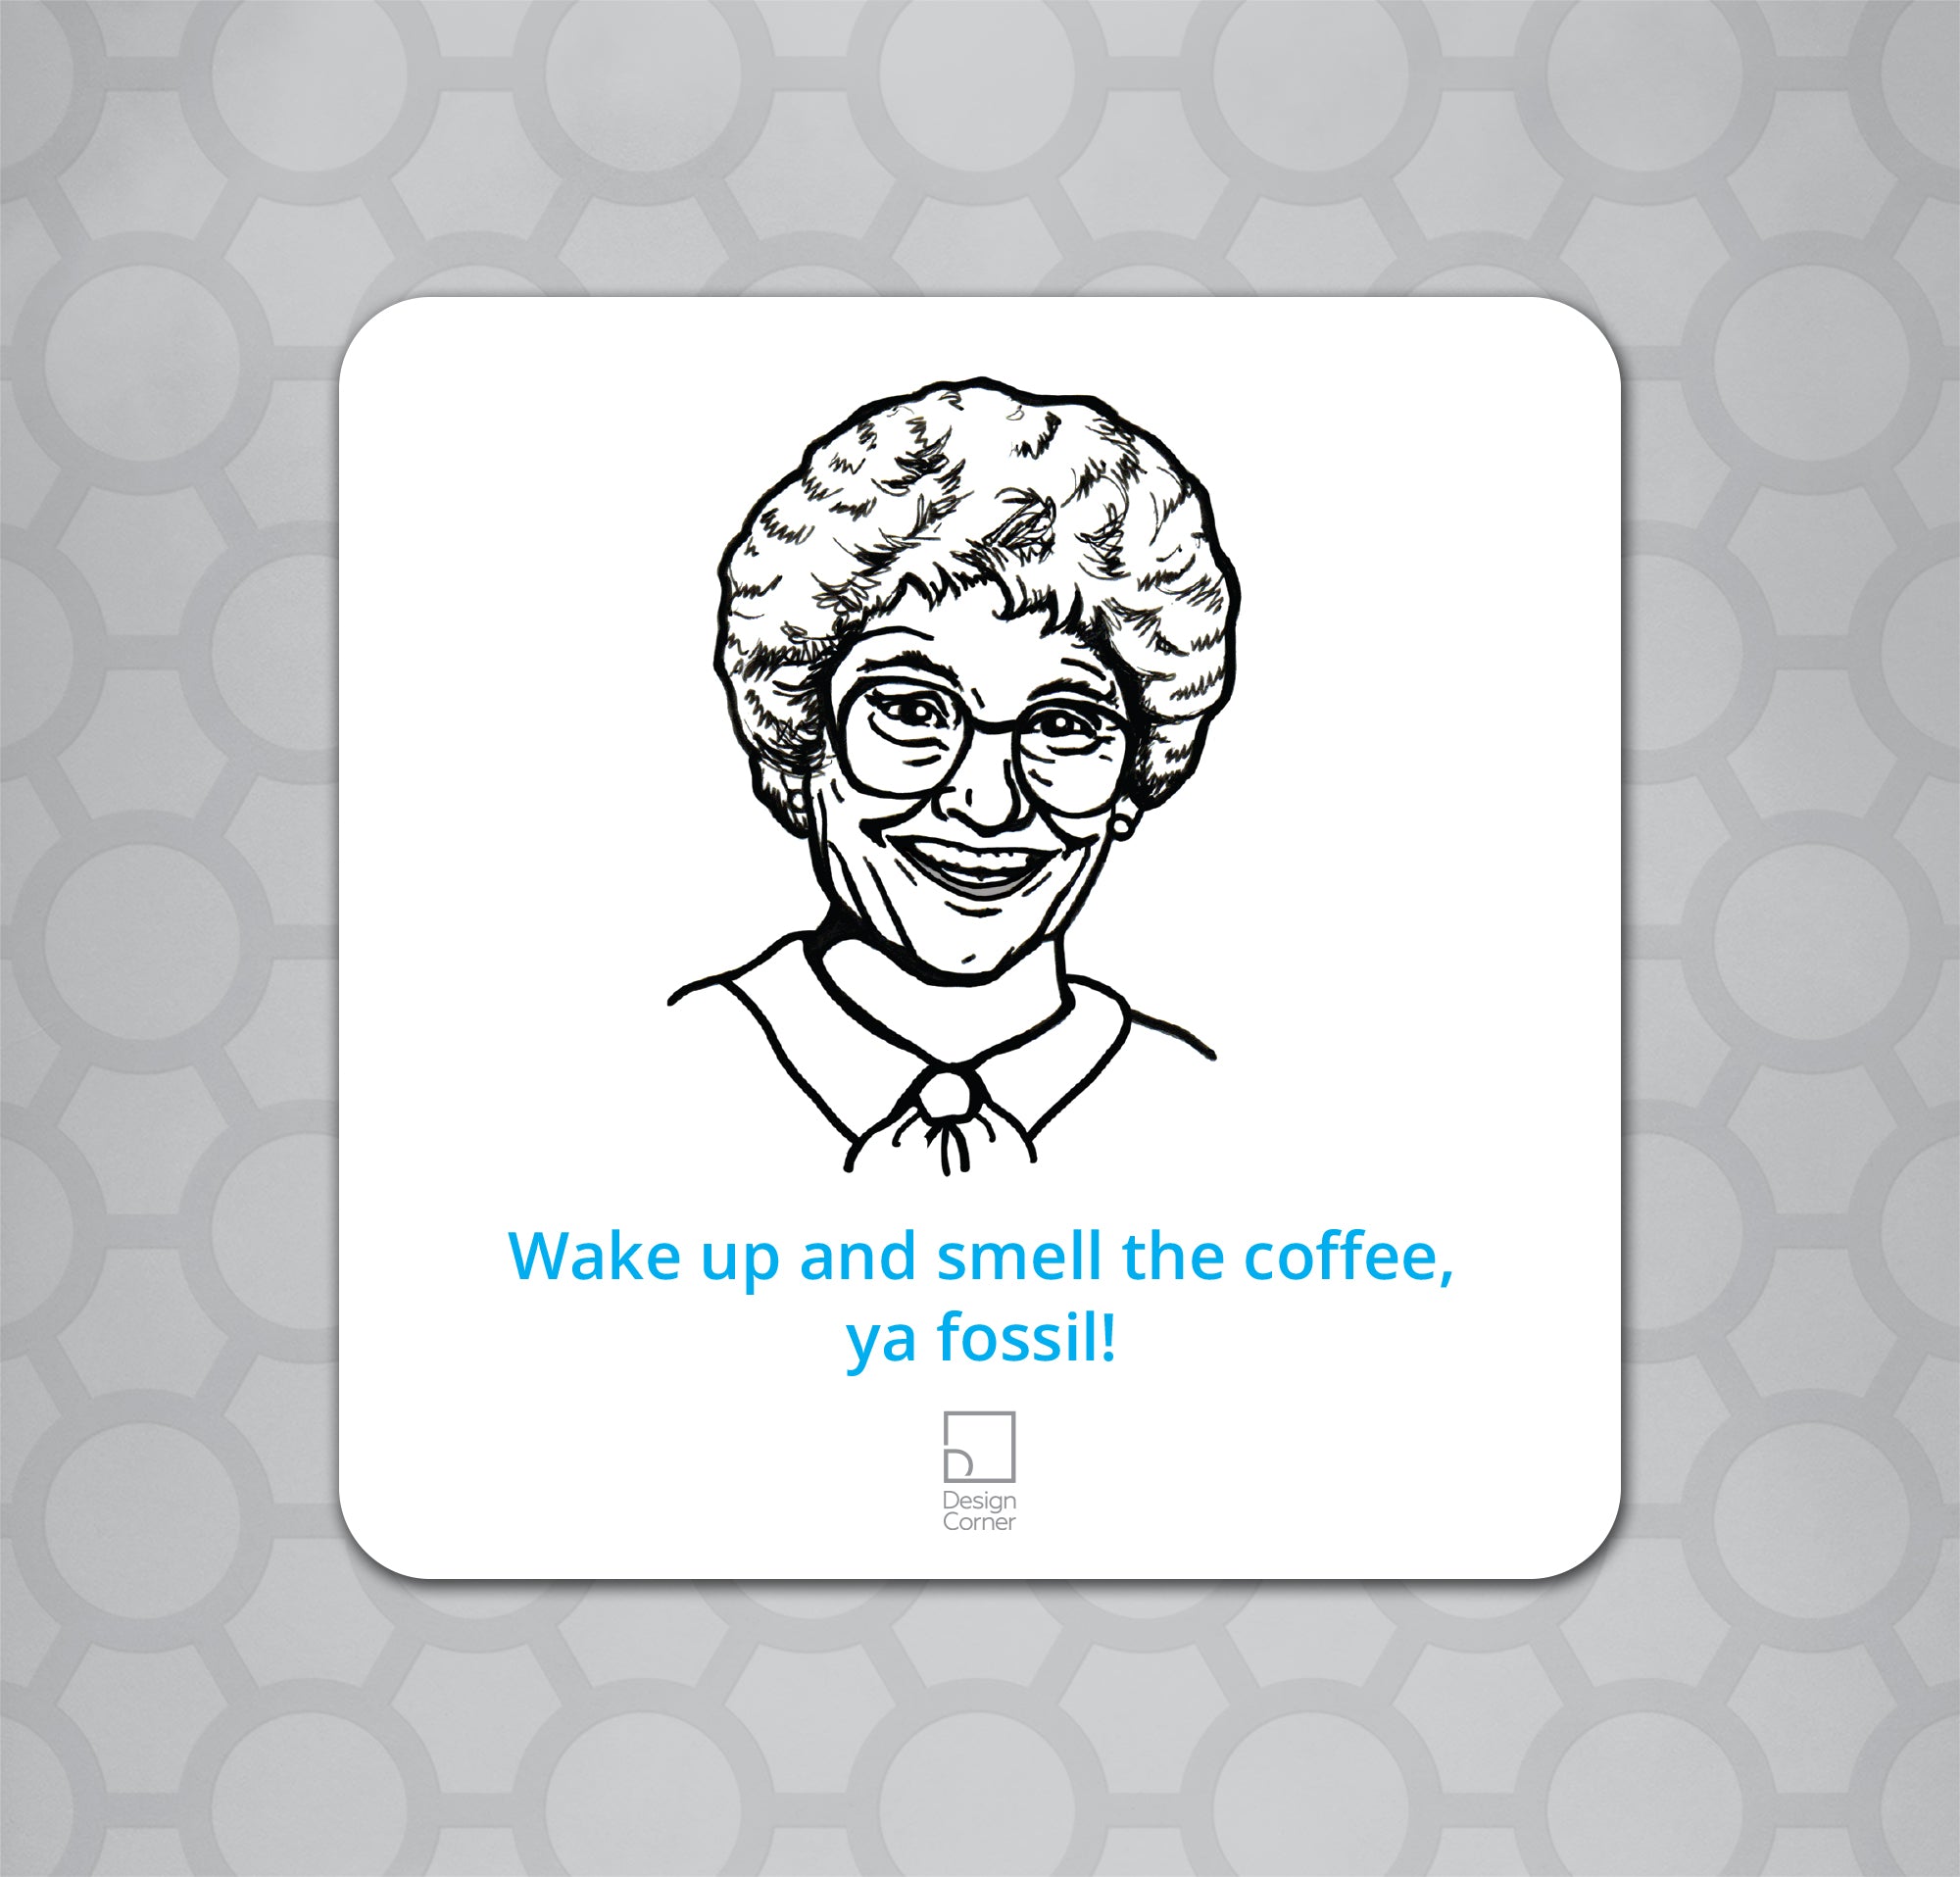 Illustration of Golden Girls Sophia on a coaster with caption "Wake up and smell the coffee, ya fossil!"